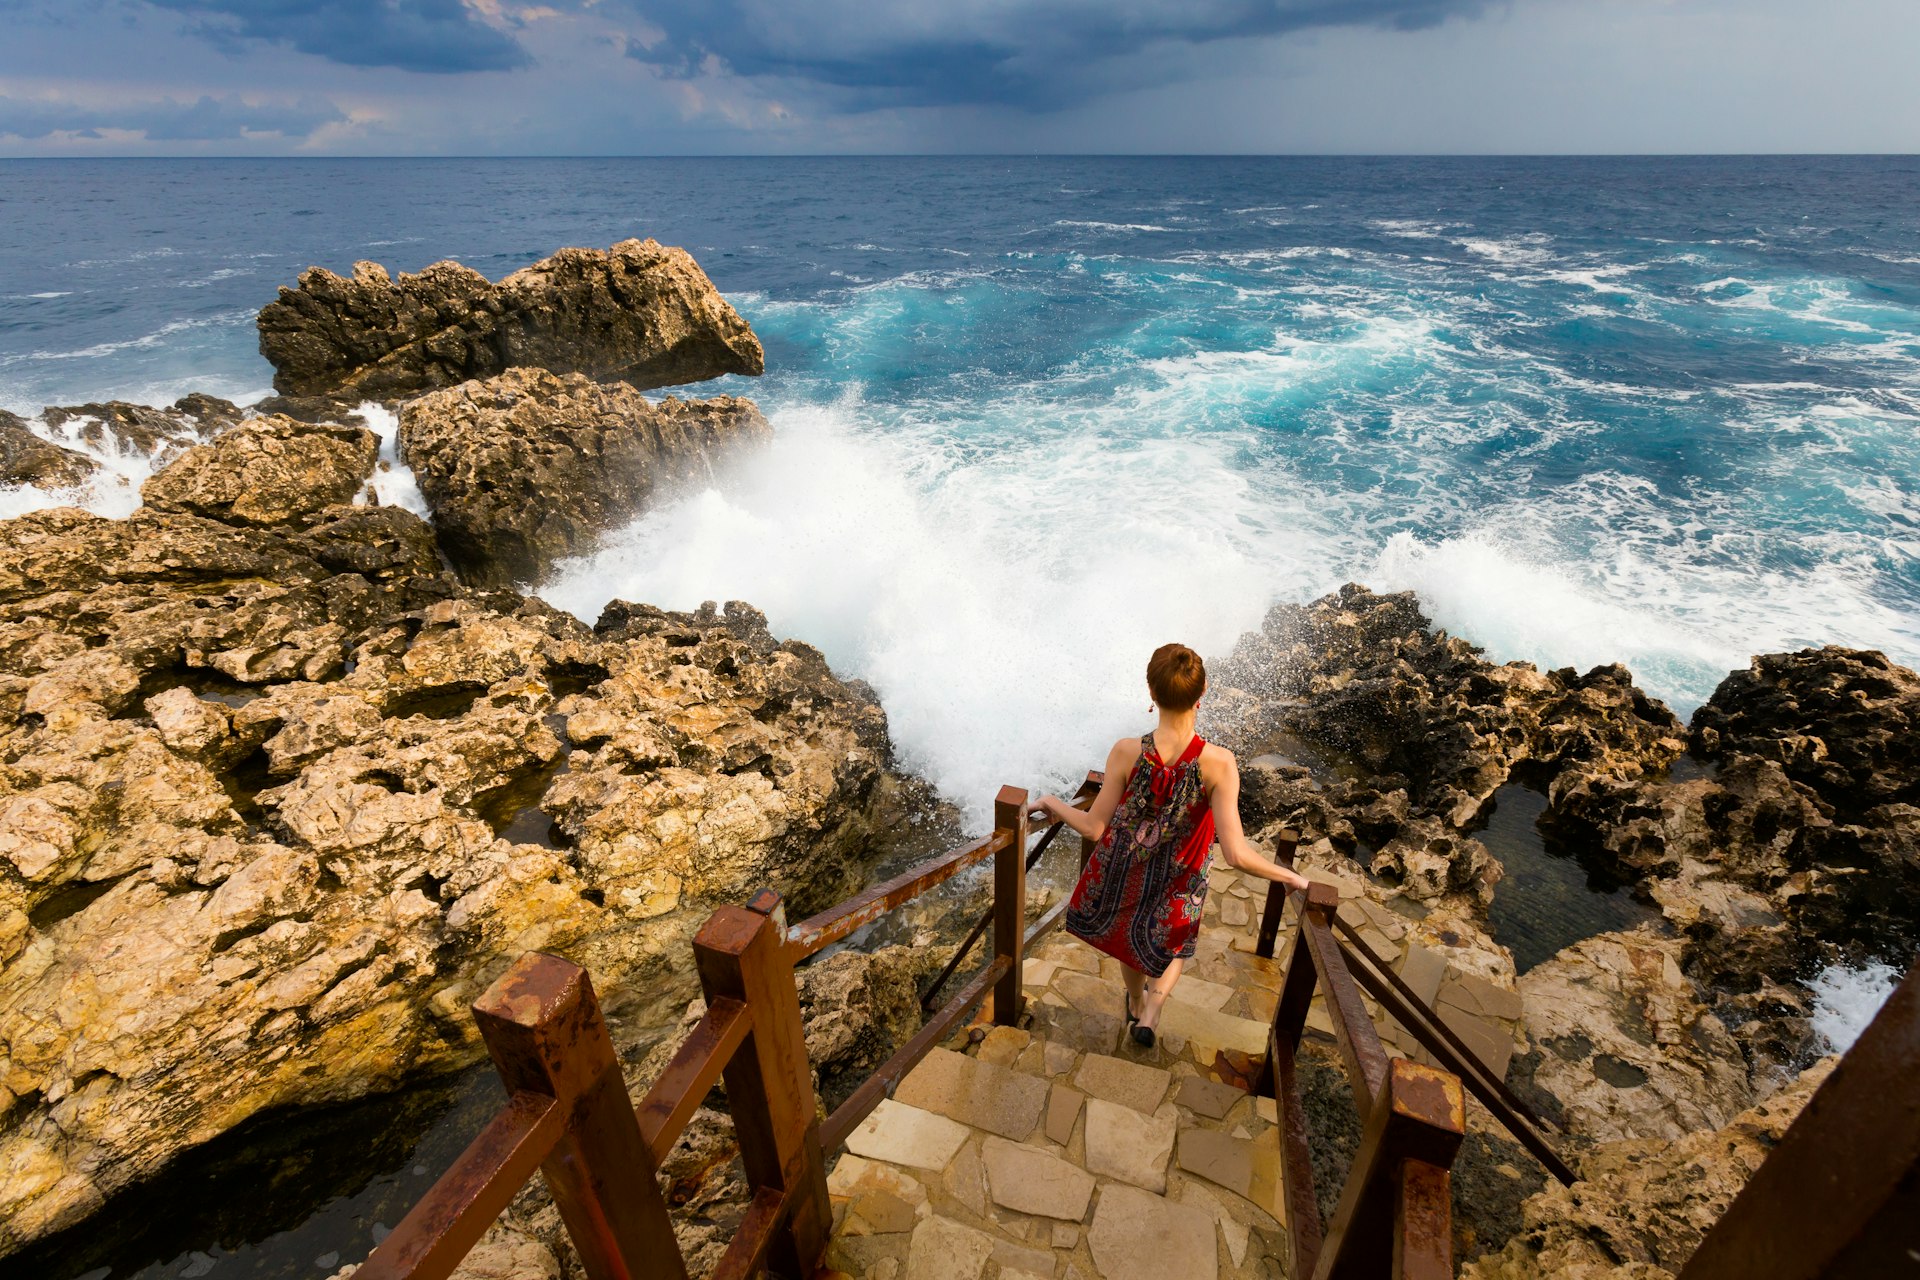 A woman climbs down steps at Cape Greco in front of rough seas